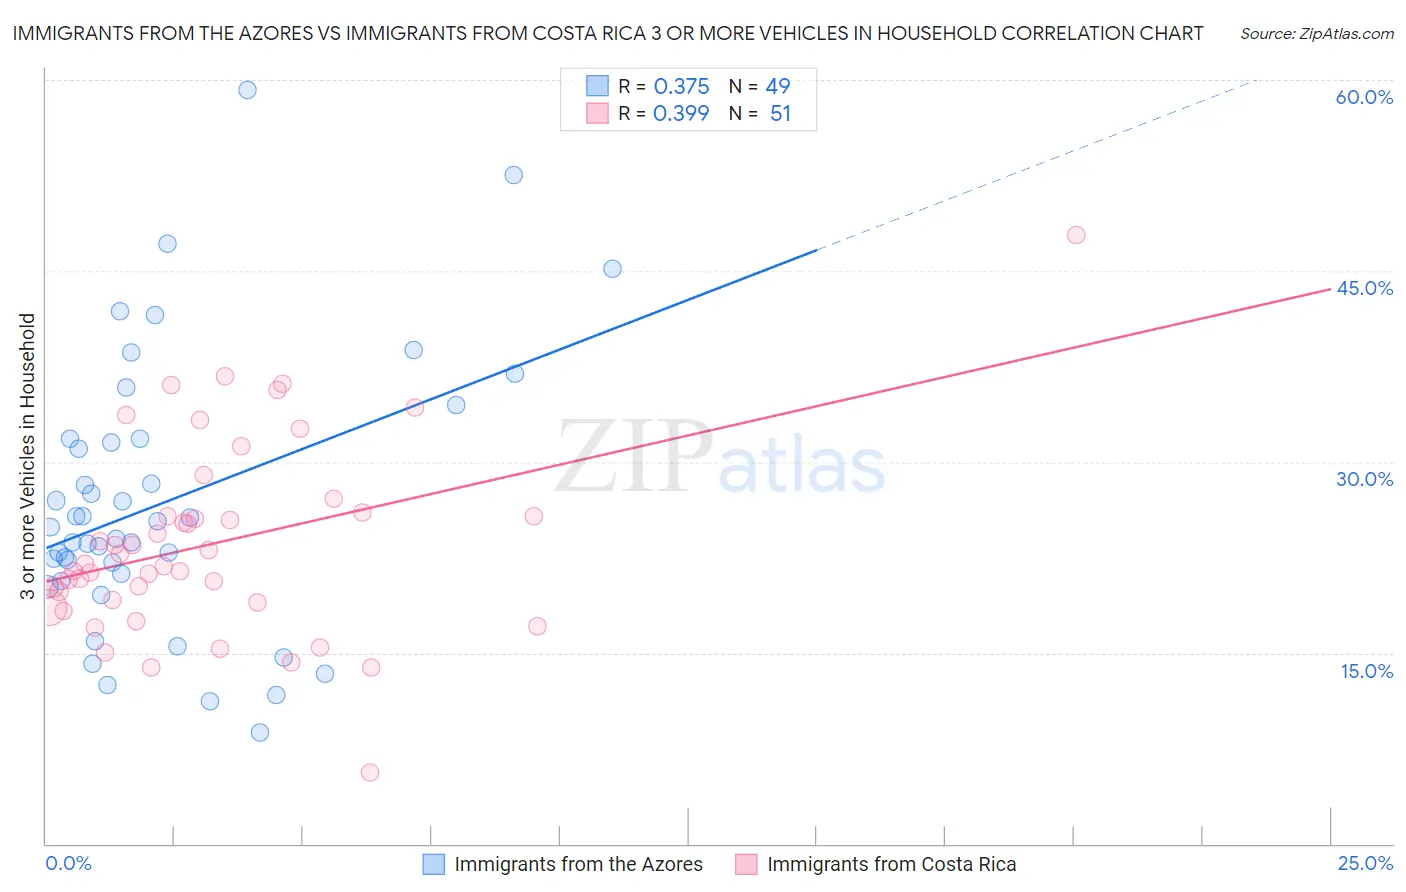 Immigrants from the Azores vs Immigrants from Costa Rica 3 or more Vehicles in Household